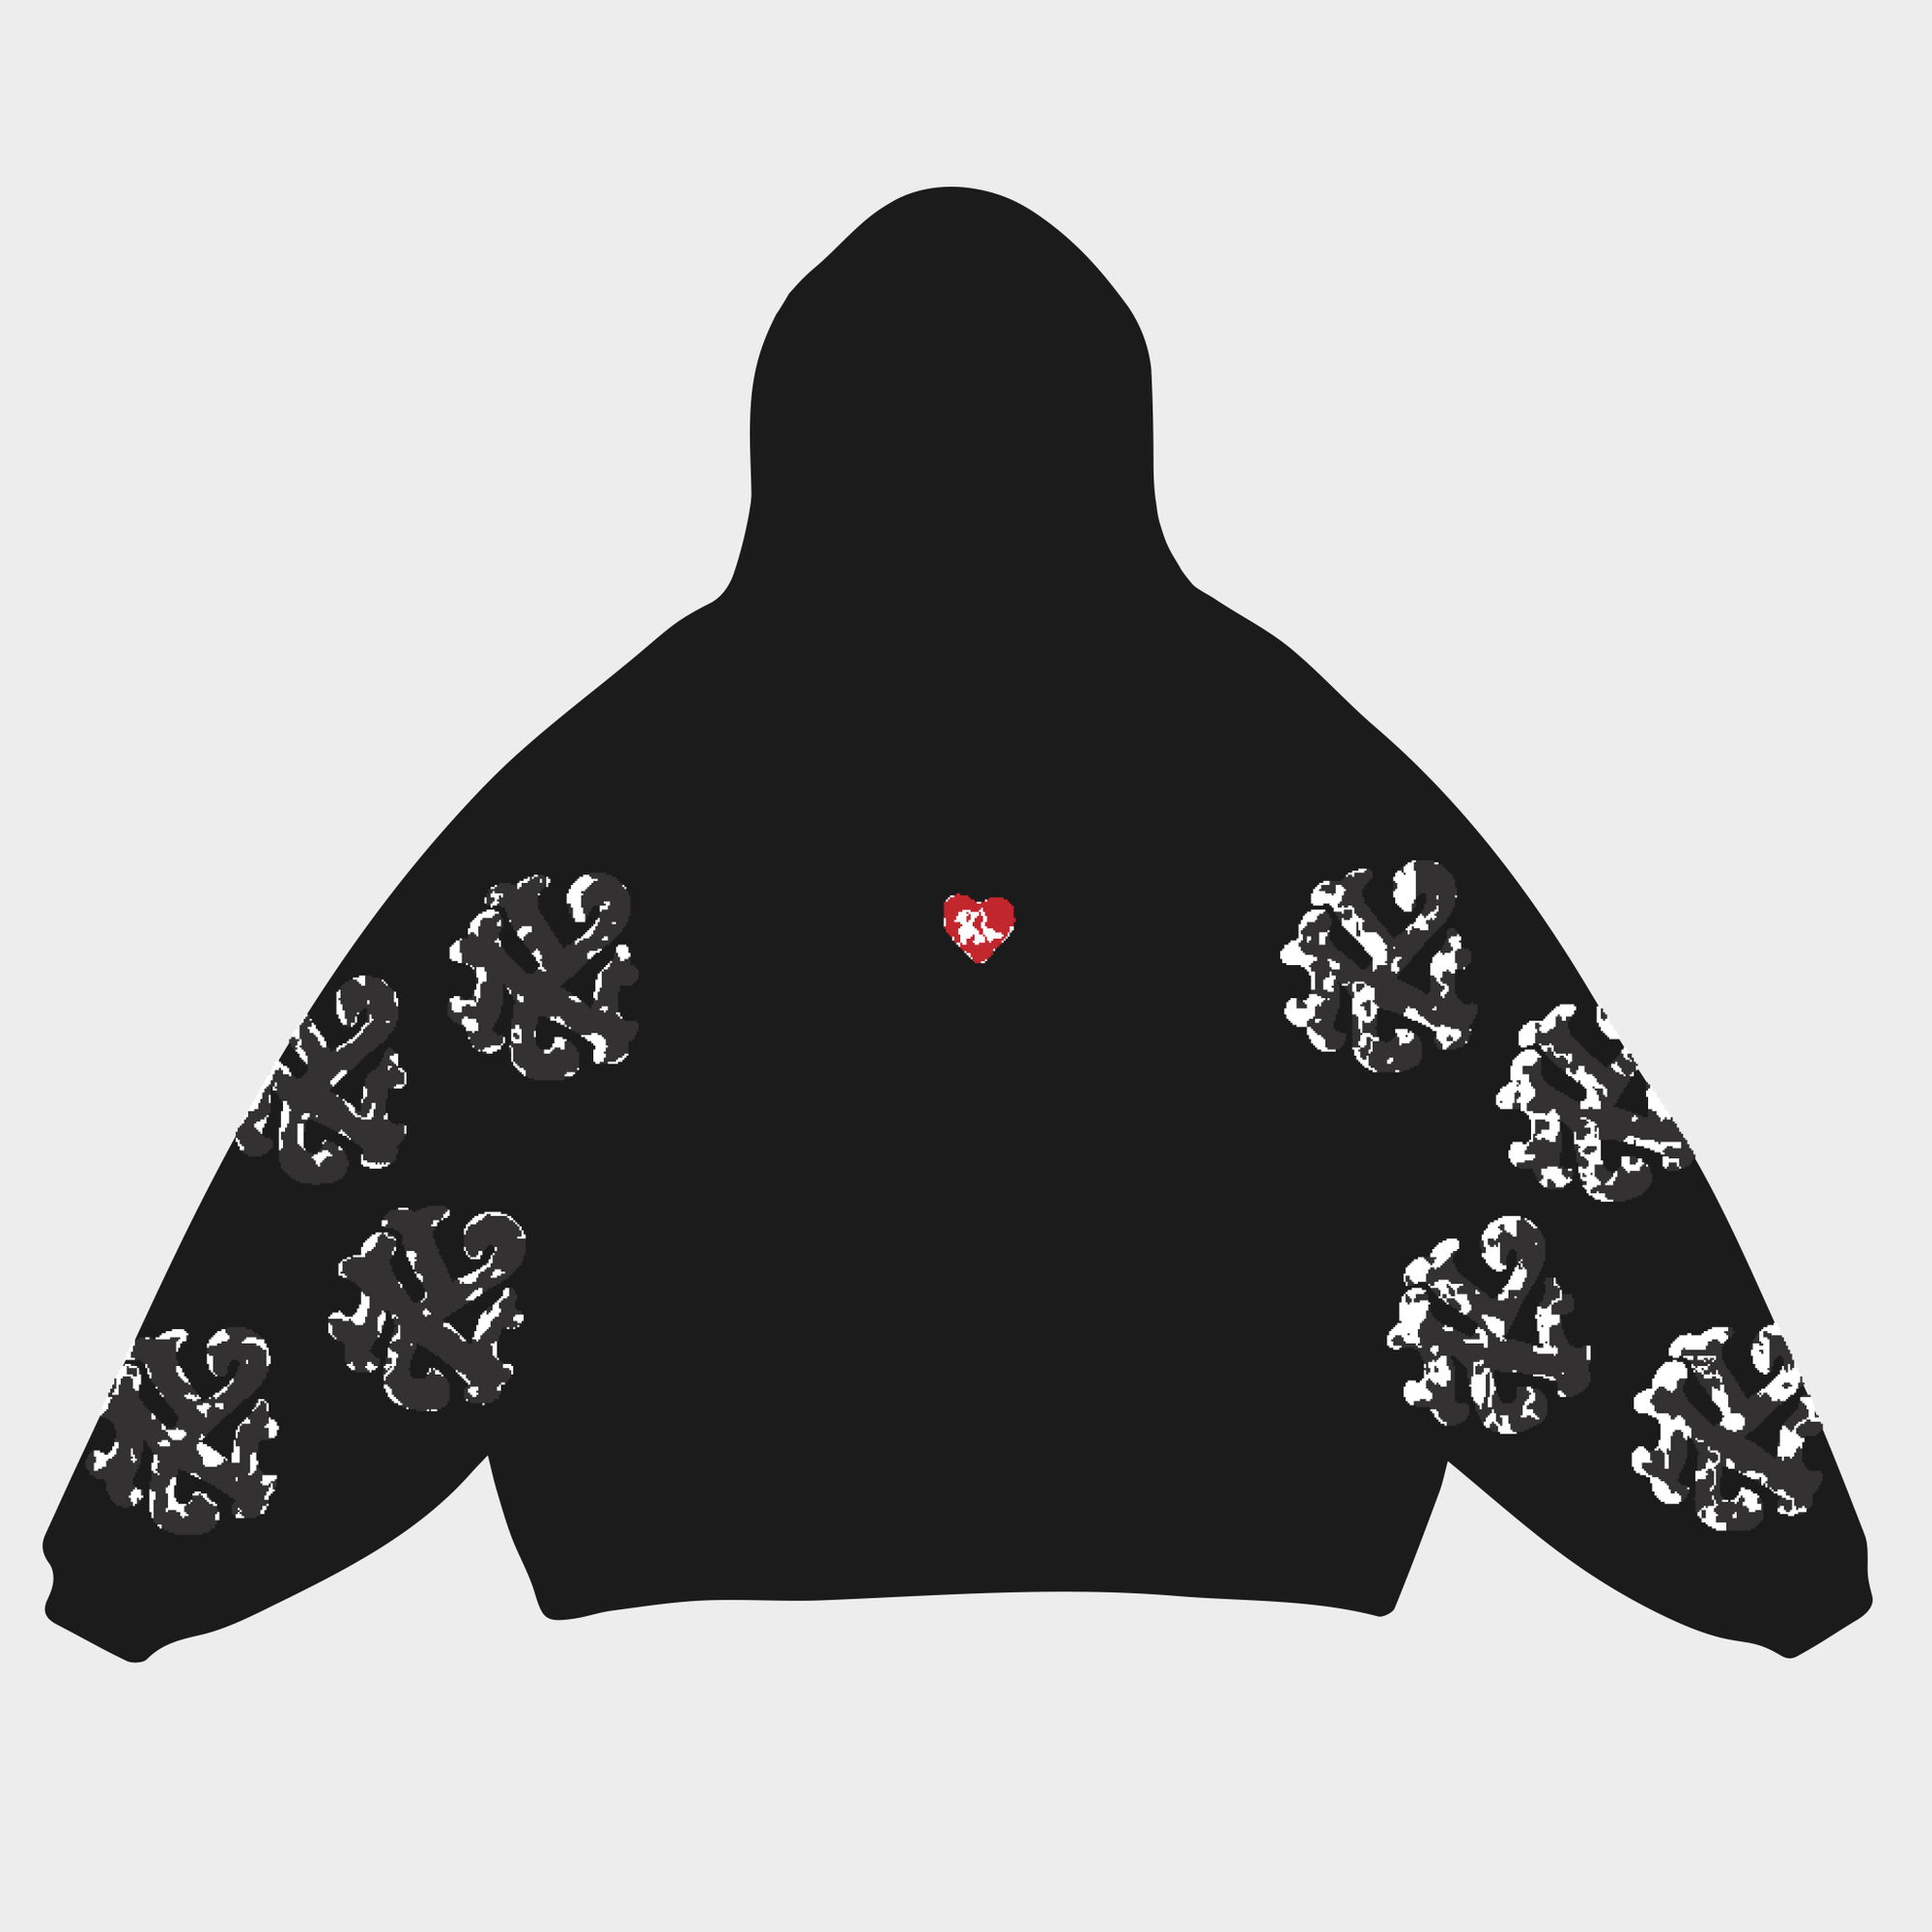 Splosh "Not NYC" Scattered Hoodie - RED LETTERS